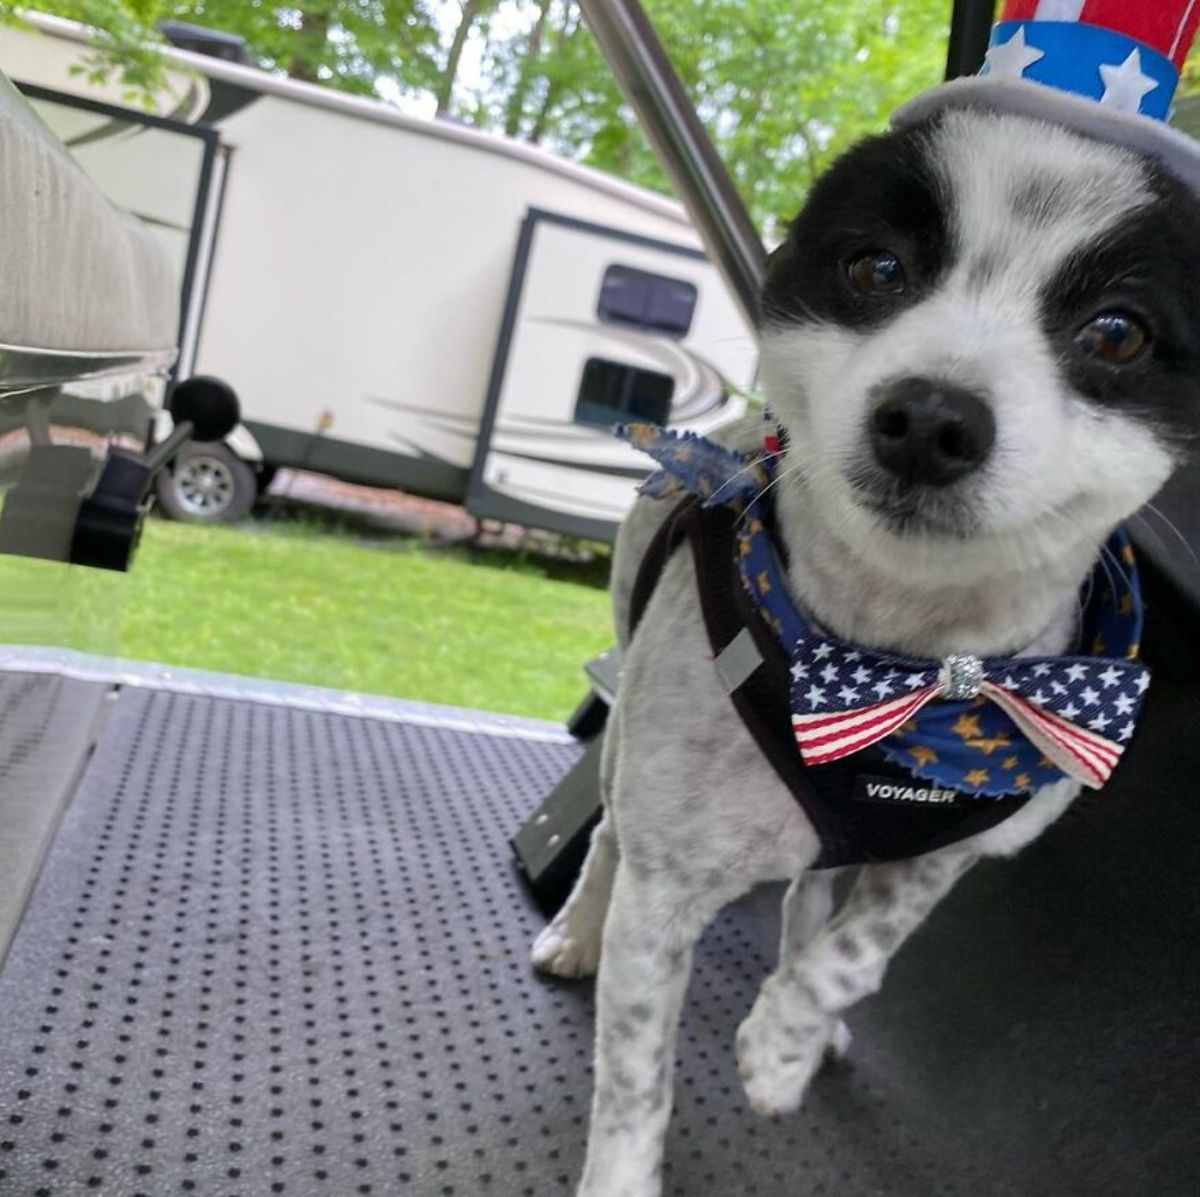 black and white dog who looks like he's smiling wearing a black harness and america-themed bowtie